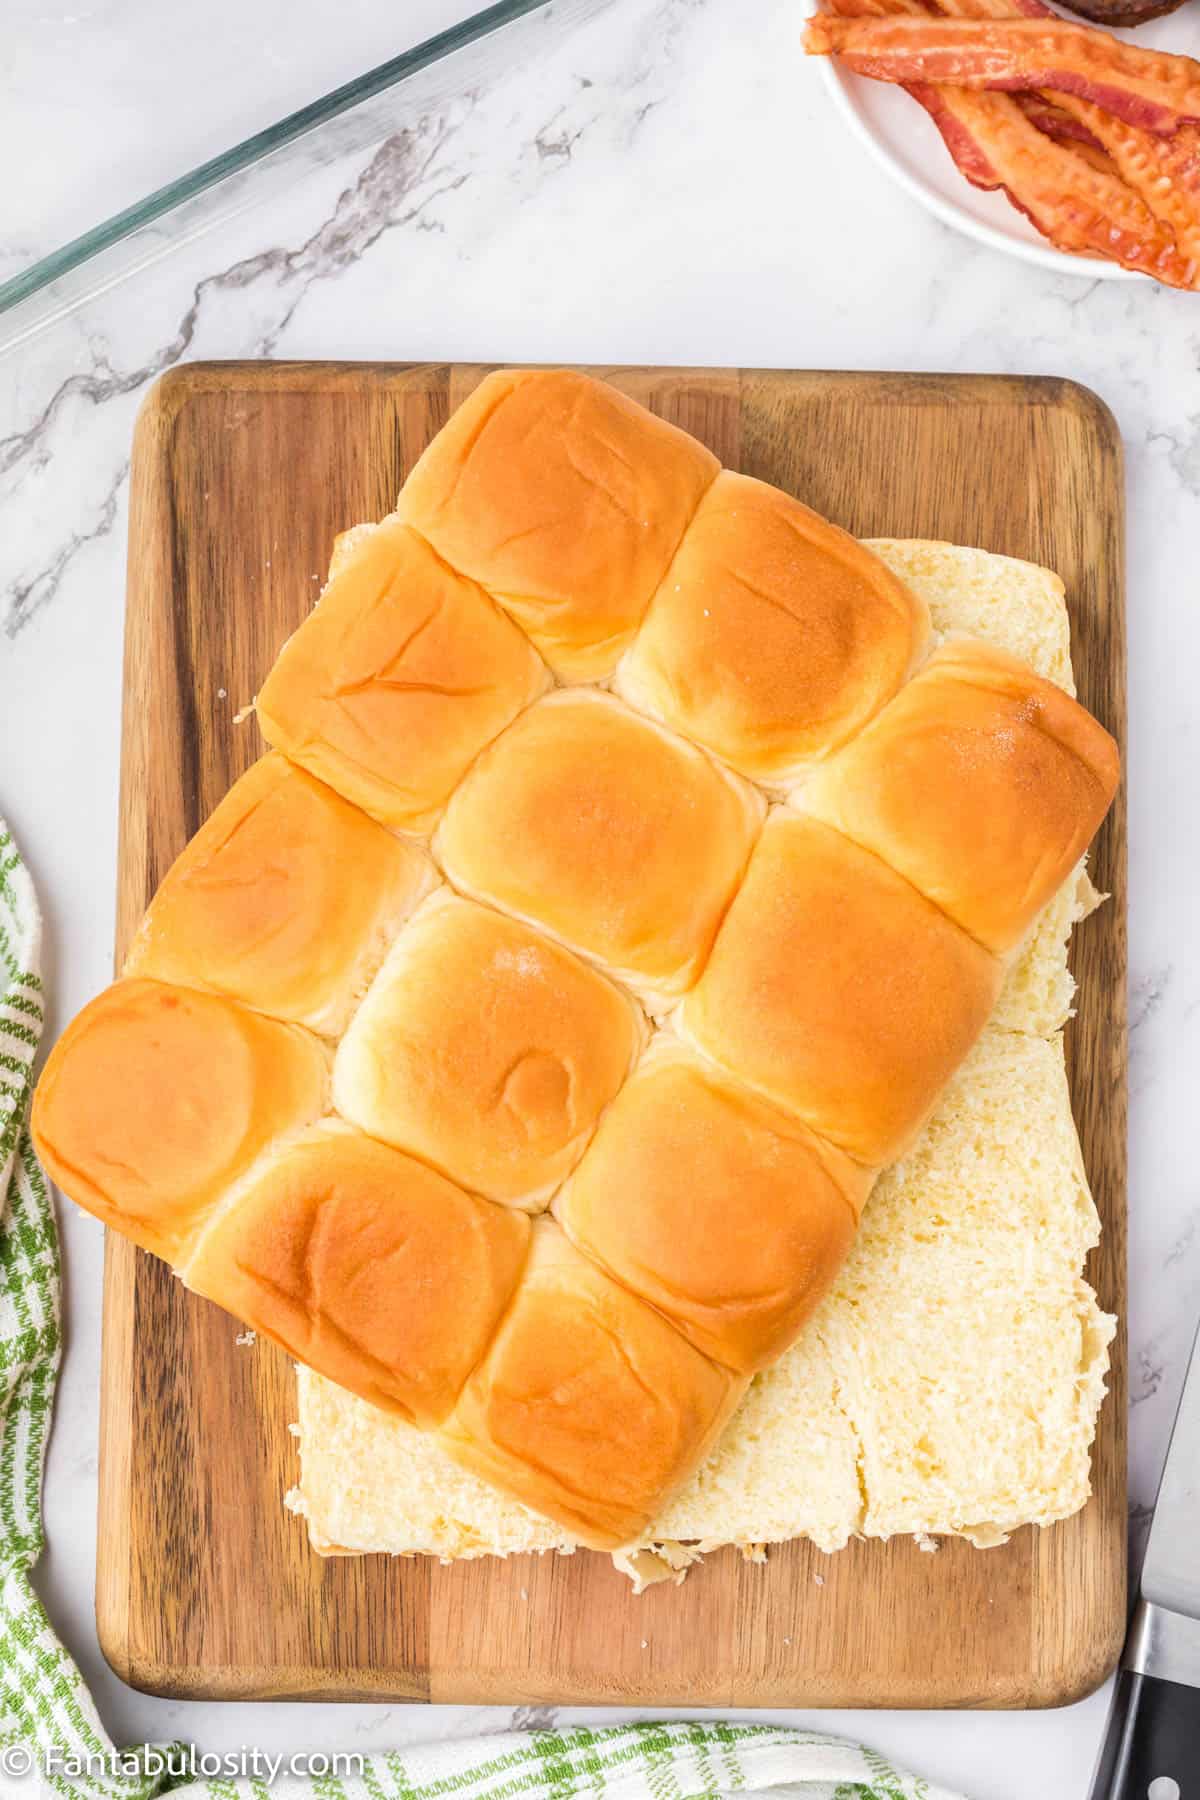 12 Hawaiian rolls have been cut horizontally and are resting on a wooden cutting board